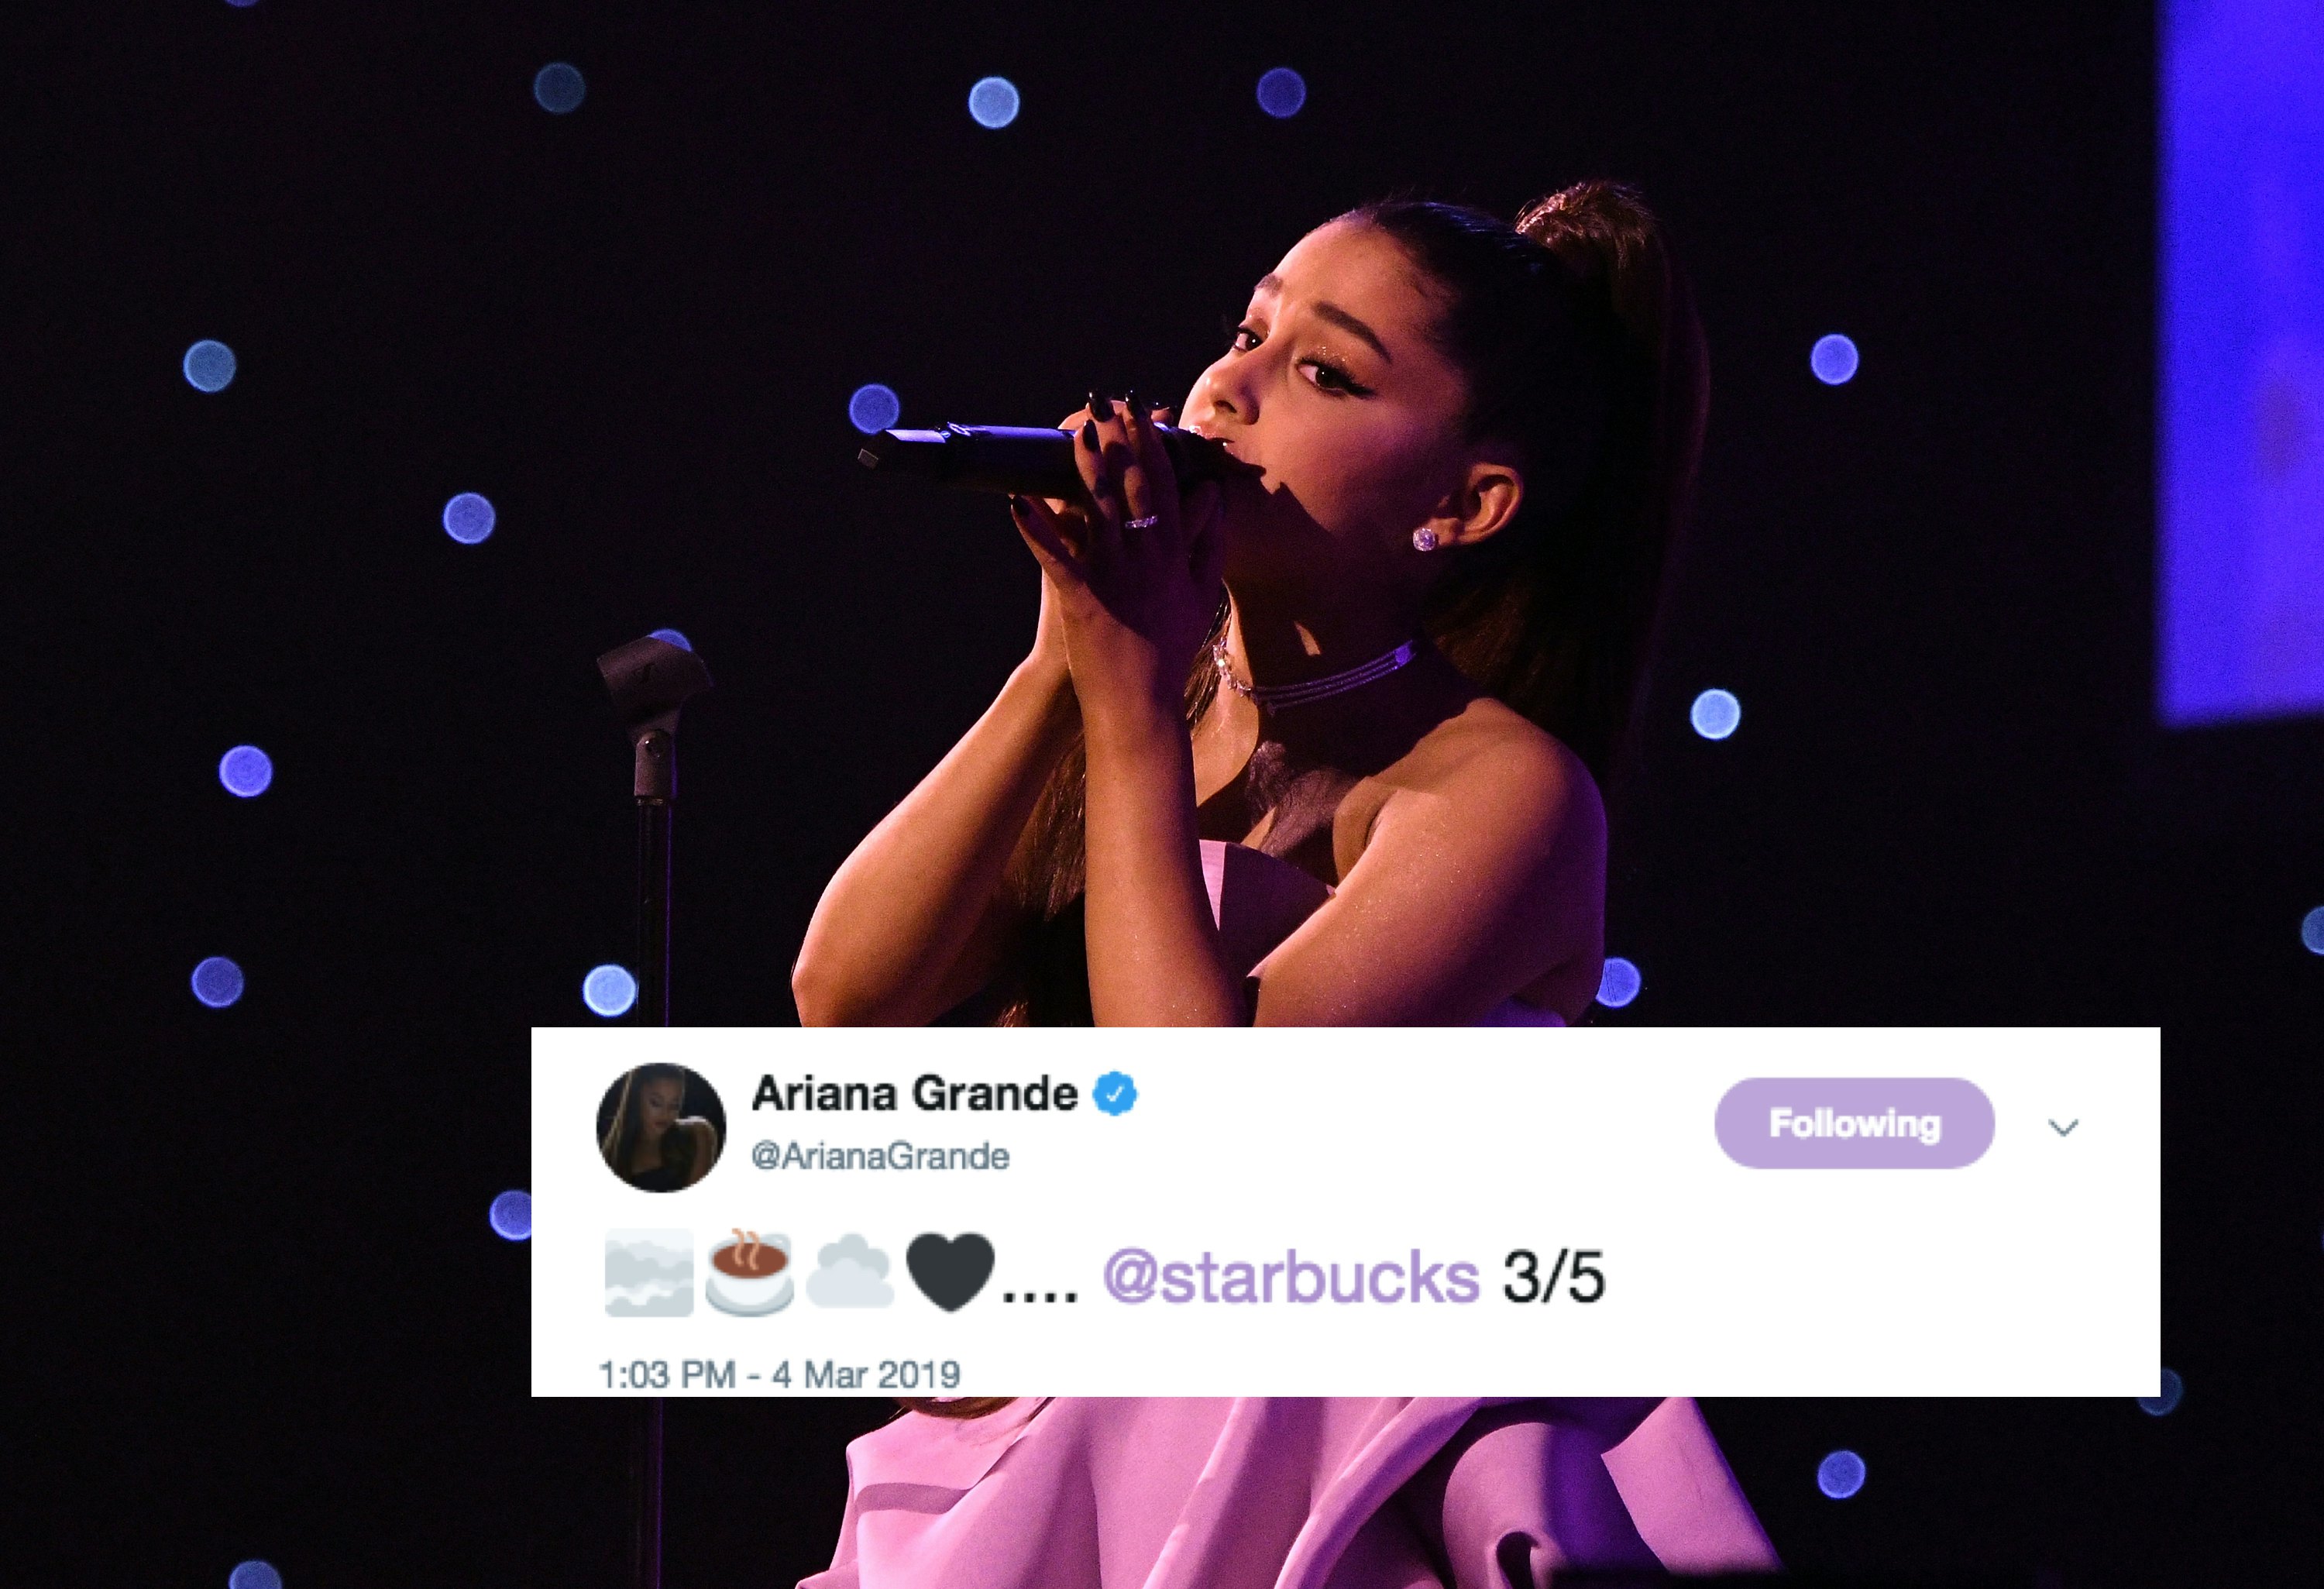 Why Is Ariana Grande Tweeting About Starbucks The Singers